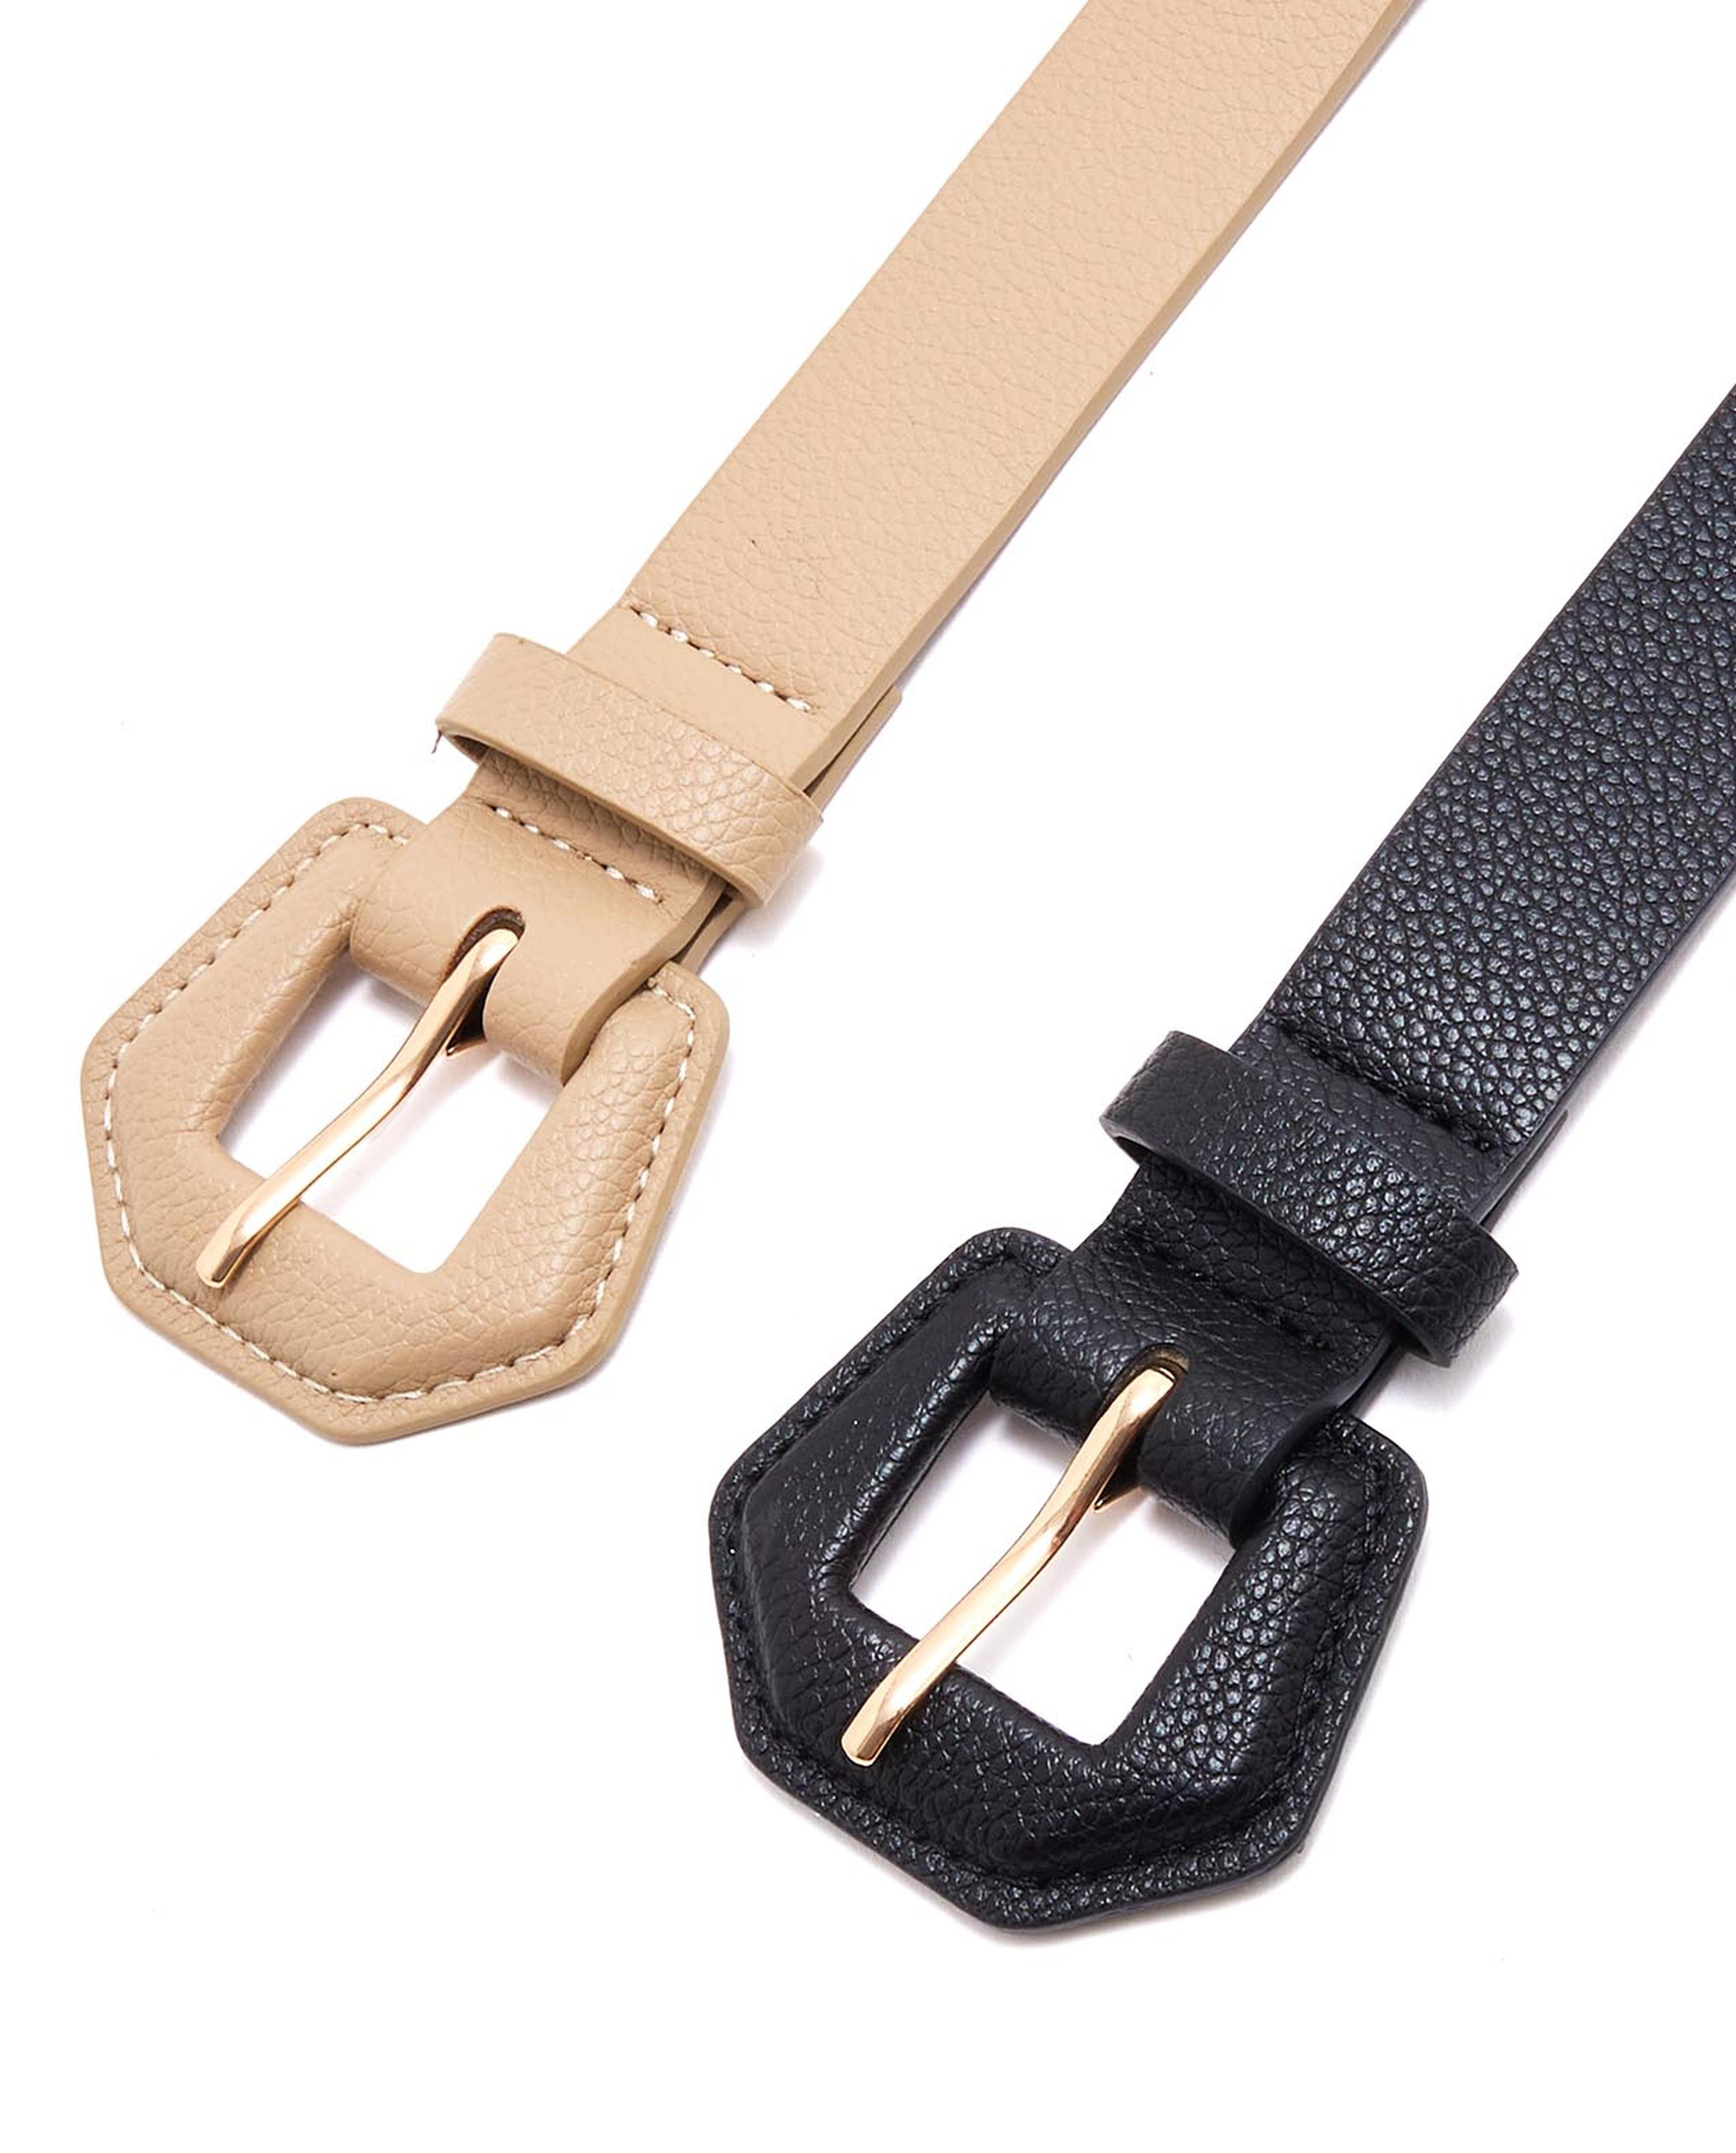 Pack of 2 Buckle Belts